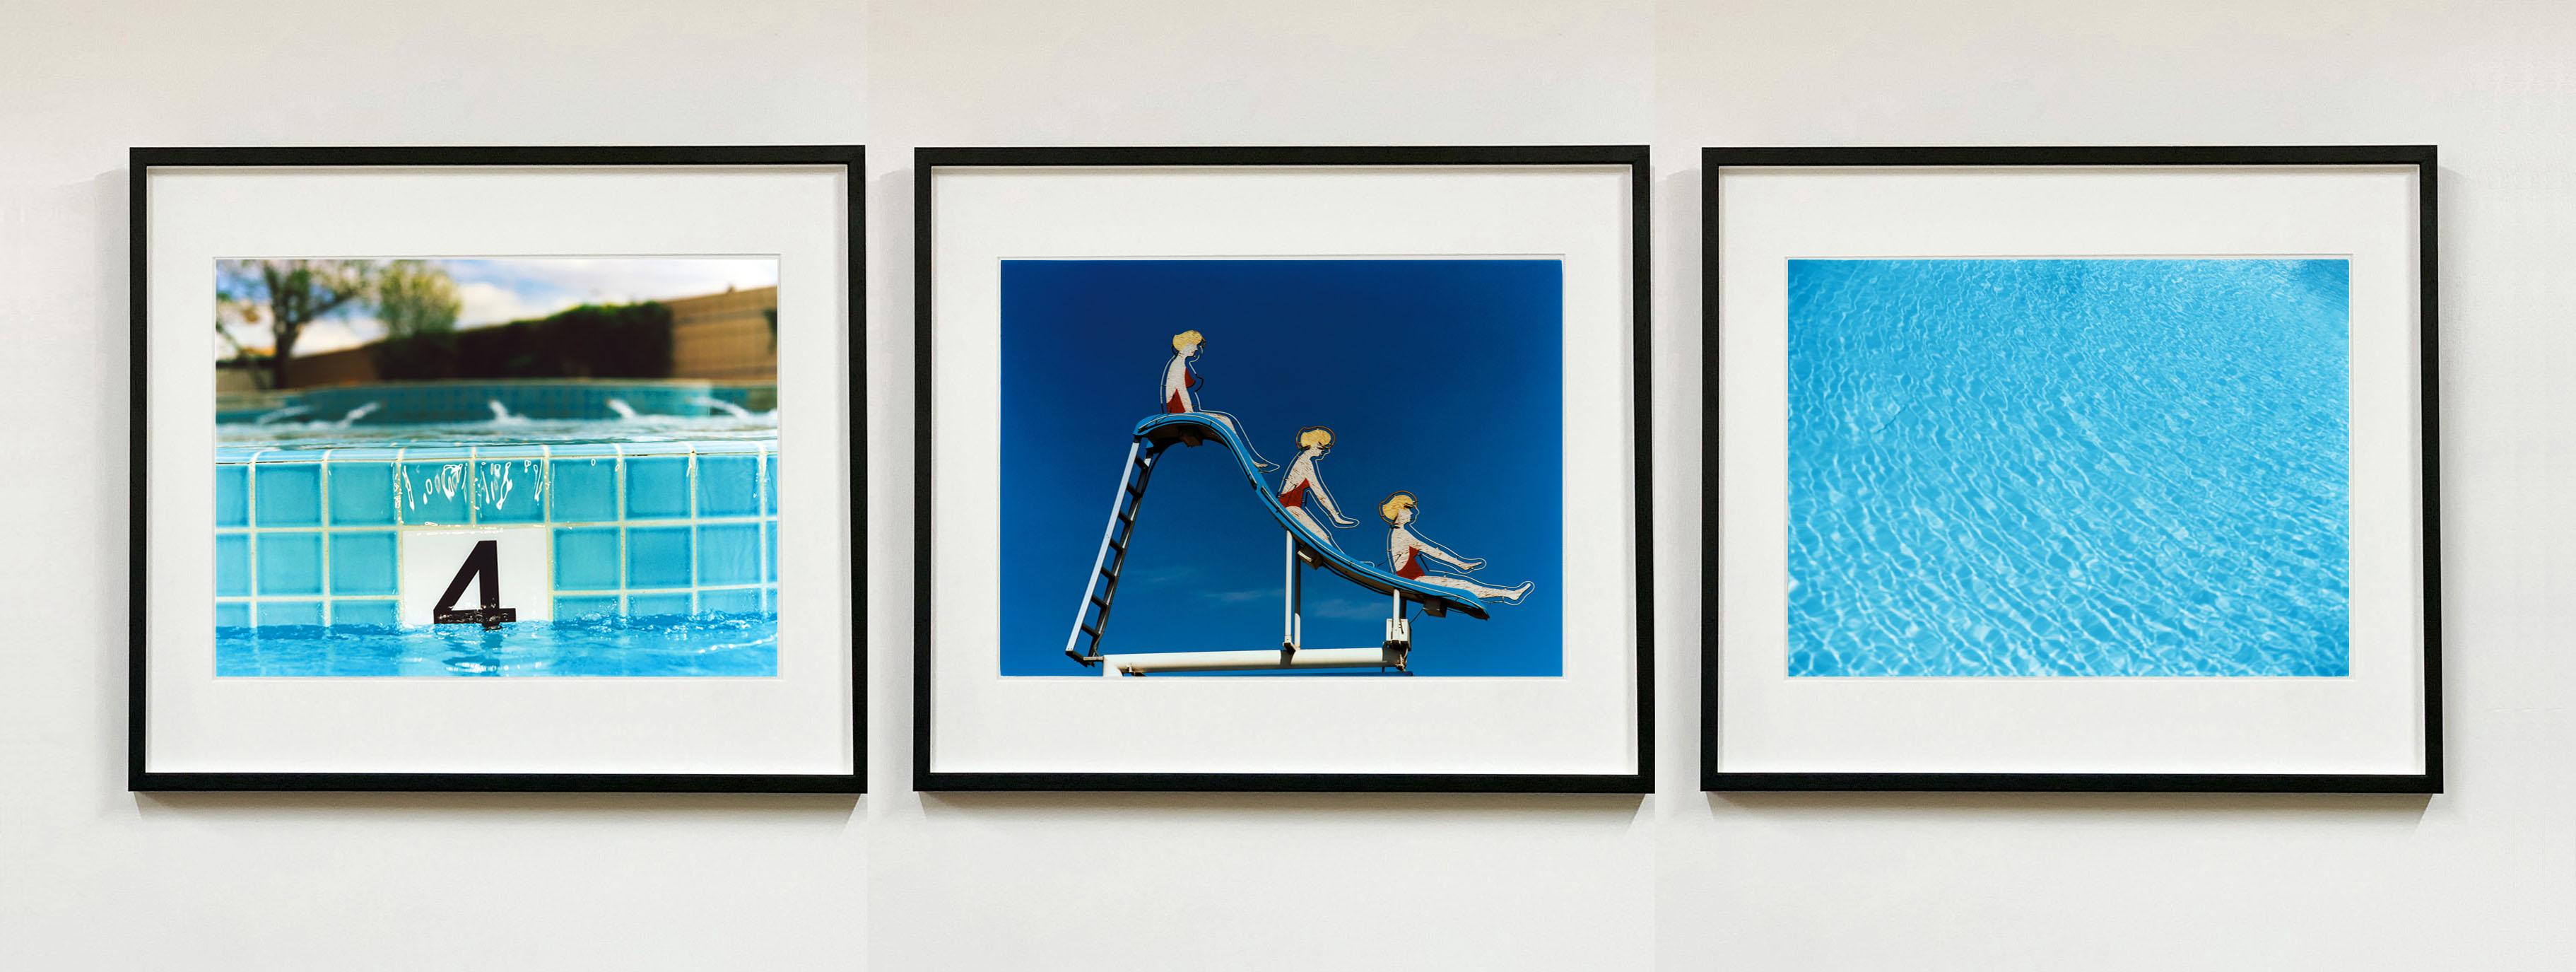 Richard Heeps Print - Dream in Colour - Three Swimming Pool Artworks - American Blue Color Photography